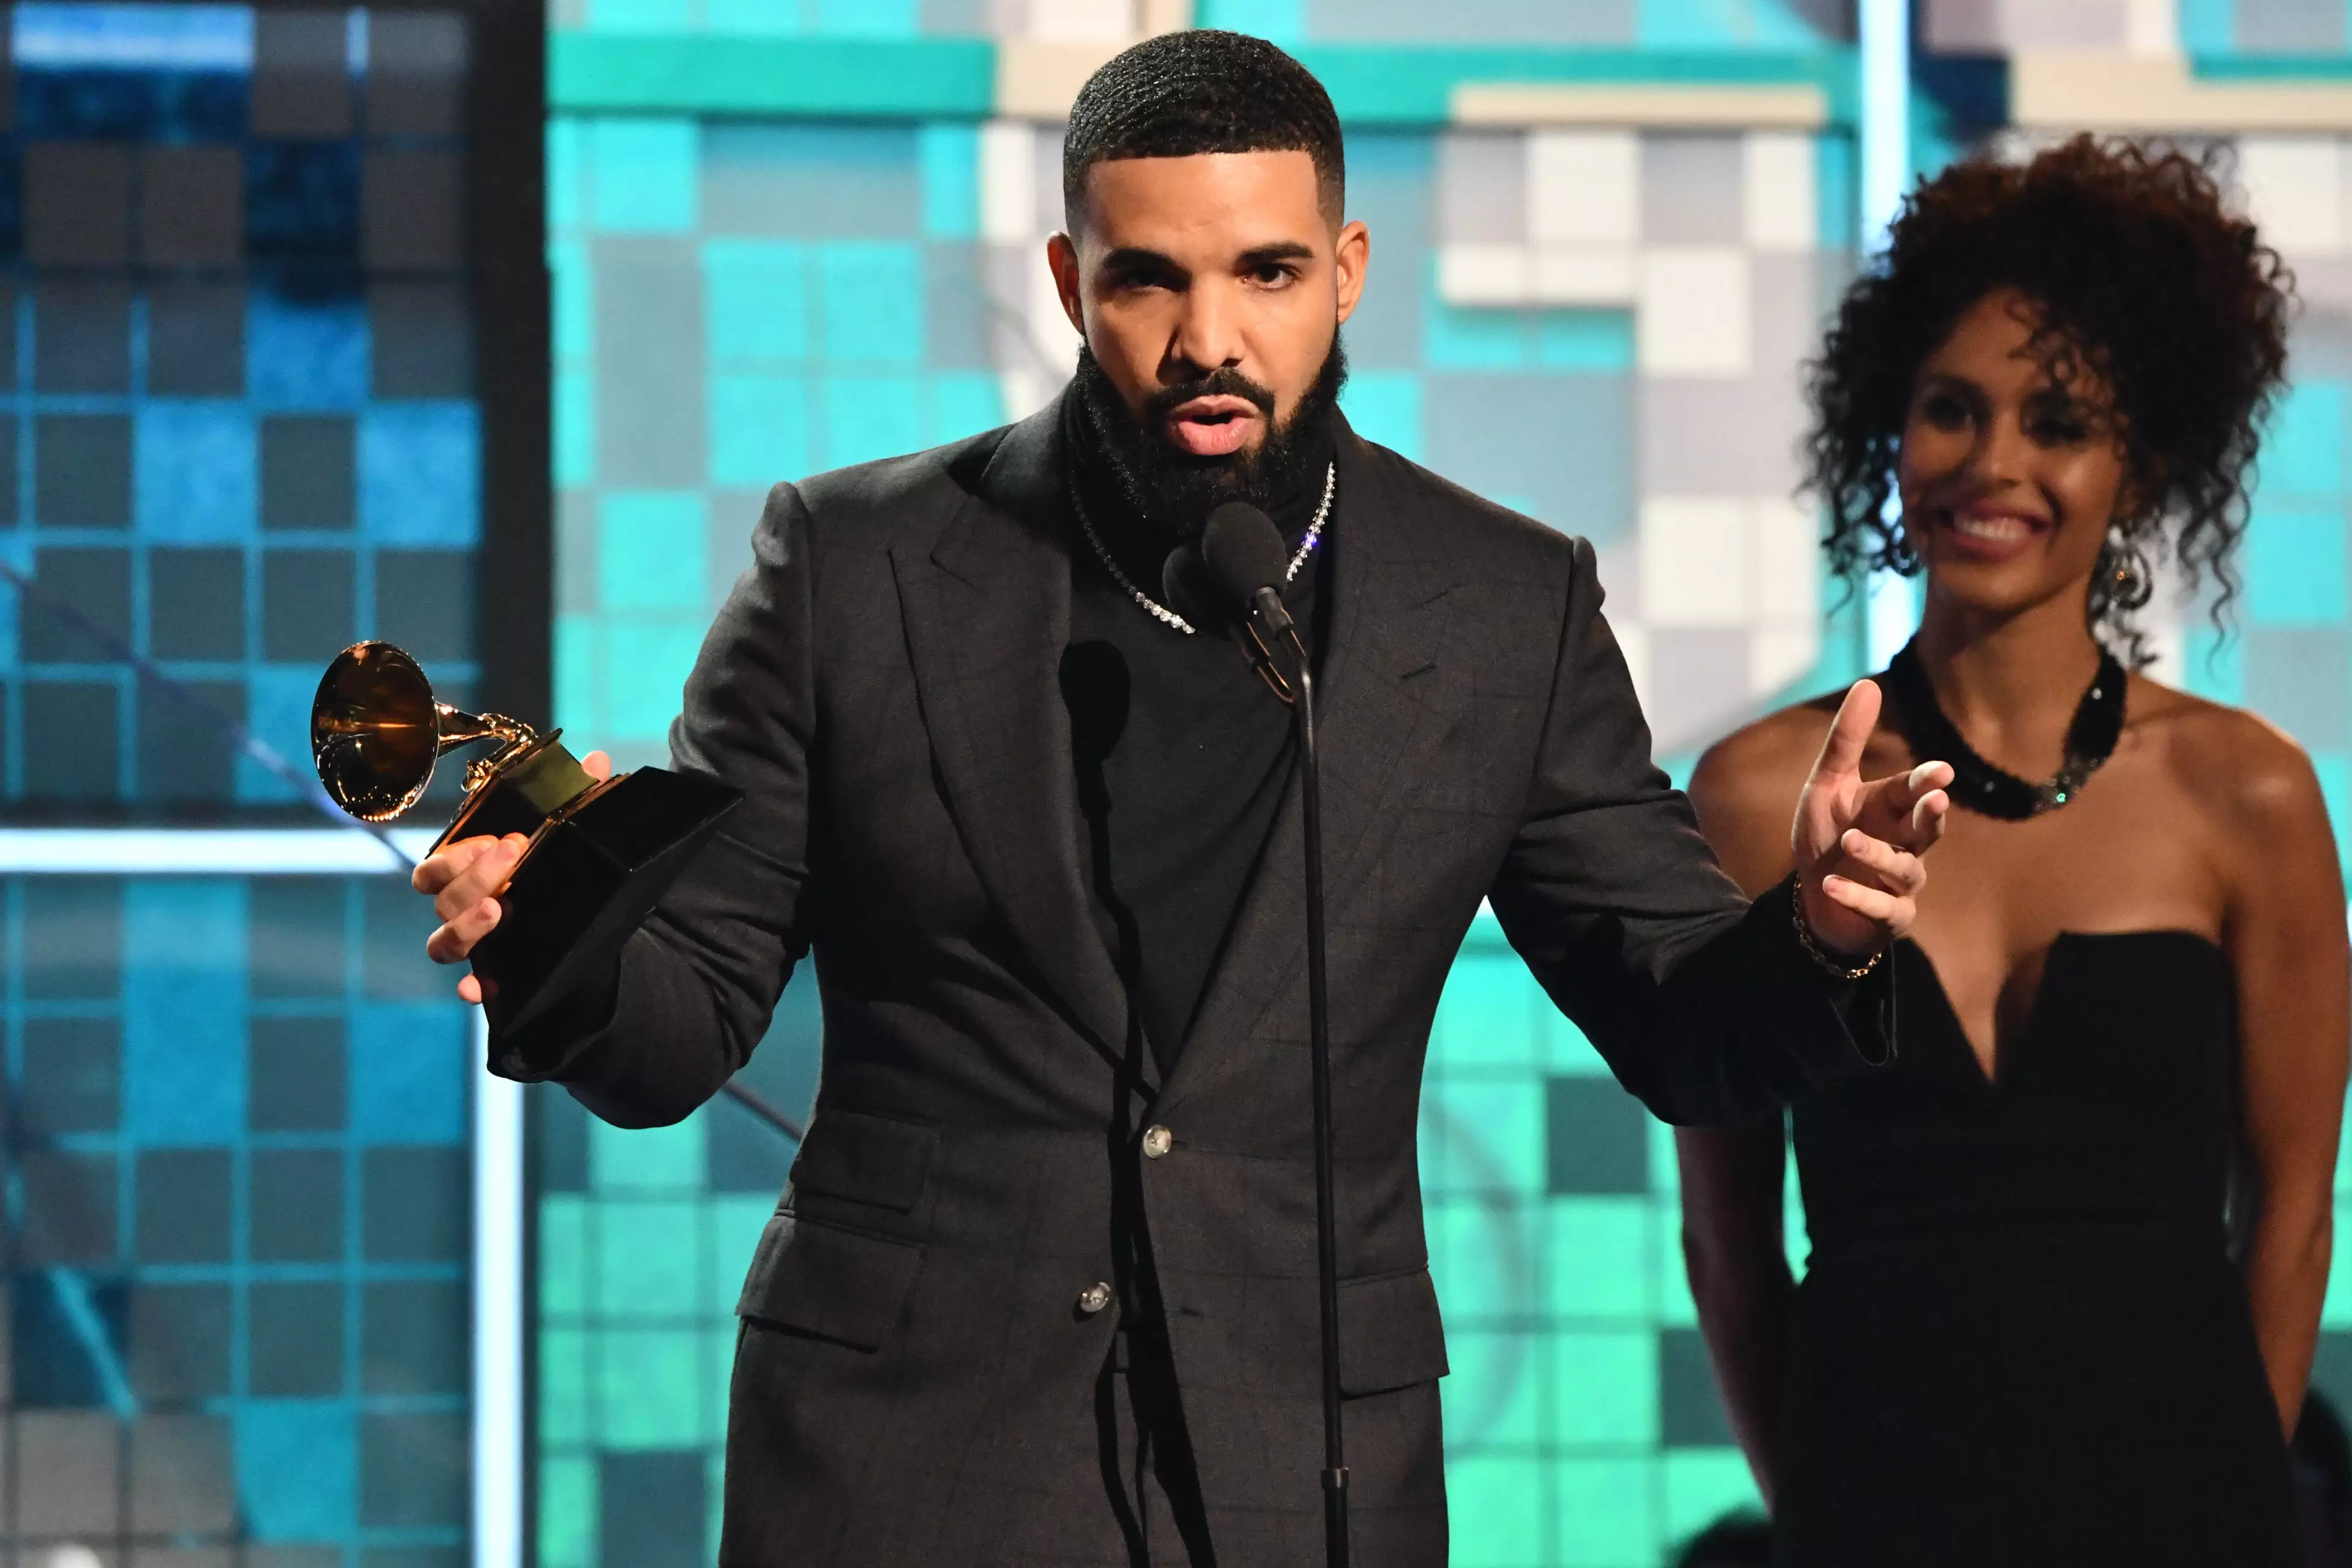 Drake's speech was cut off after he told artists they don't need an award.